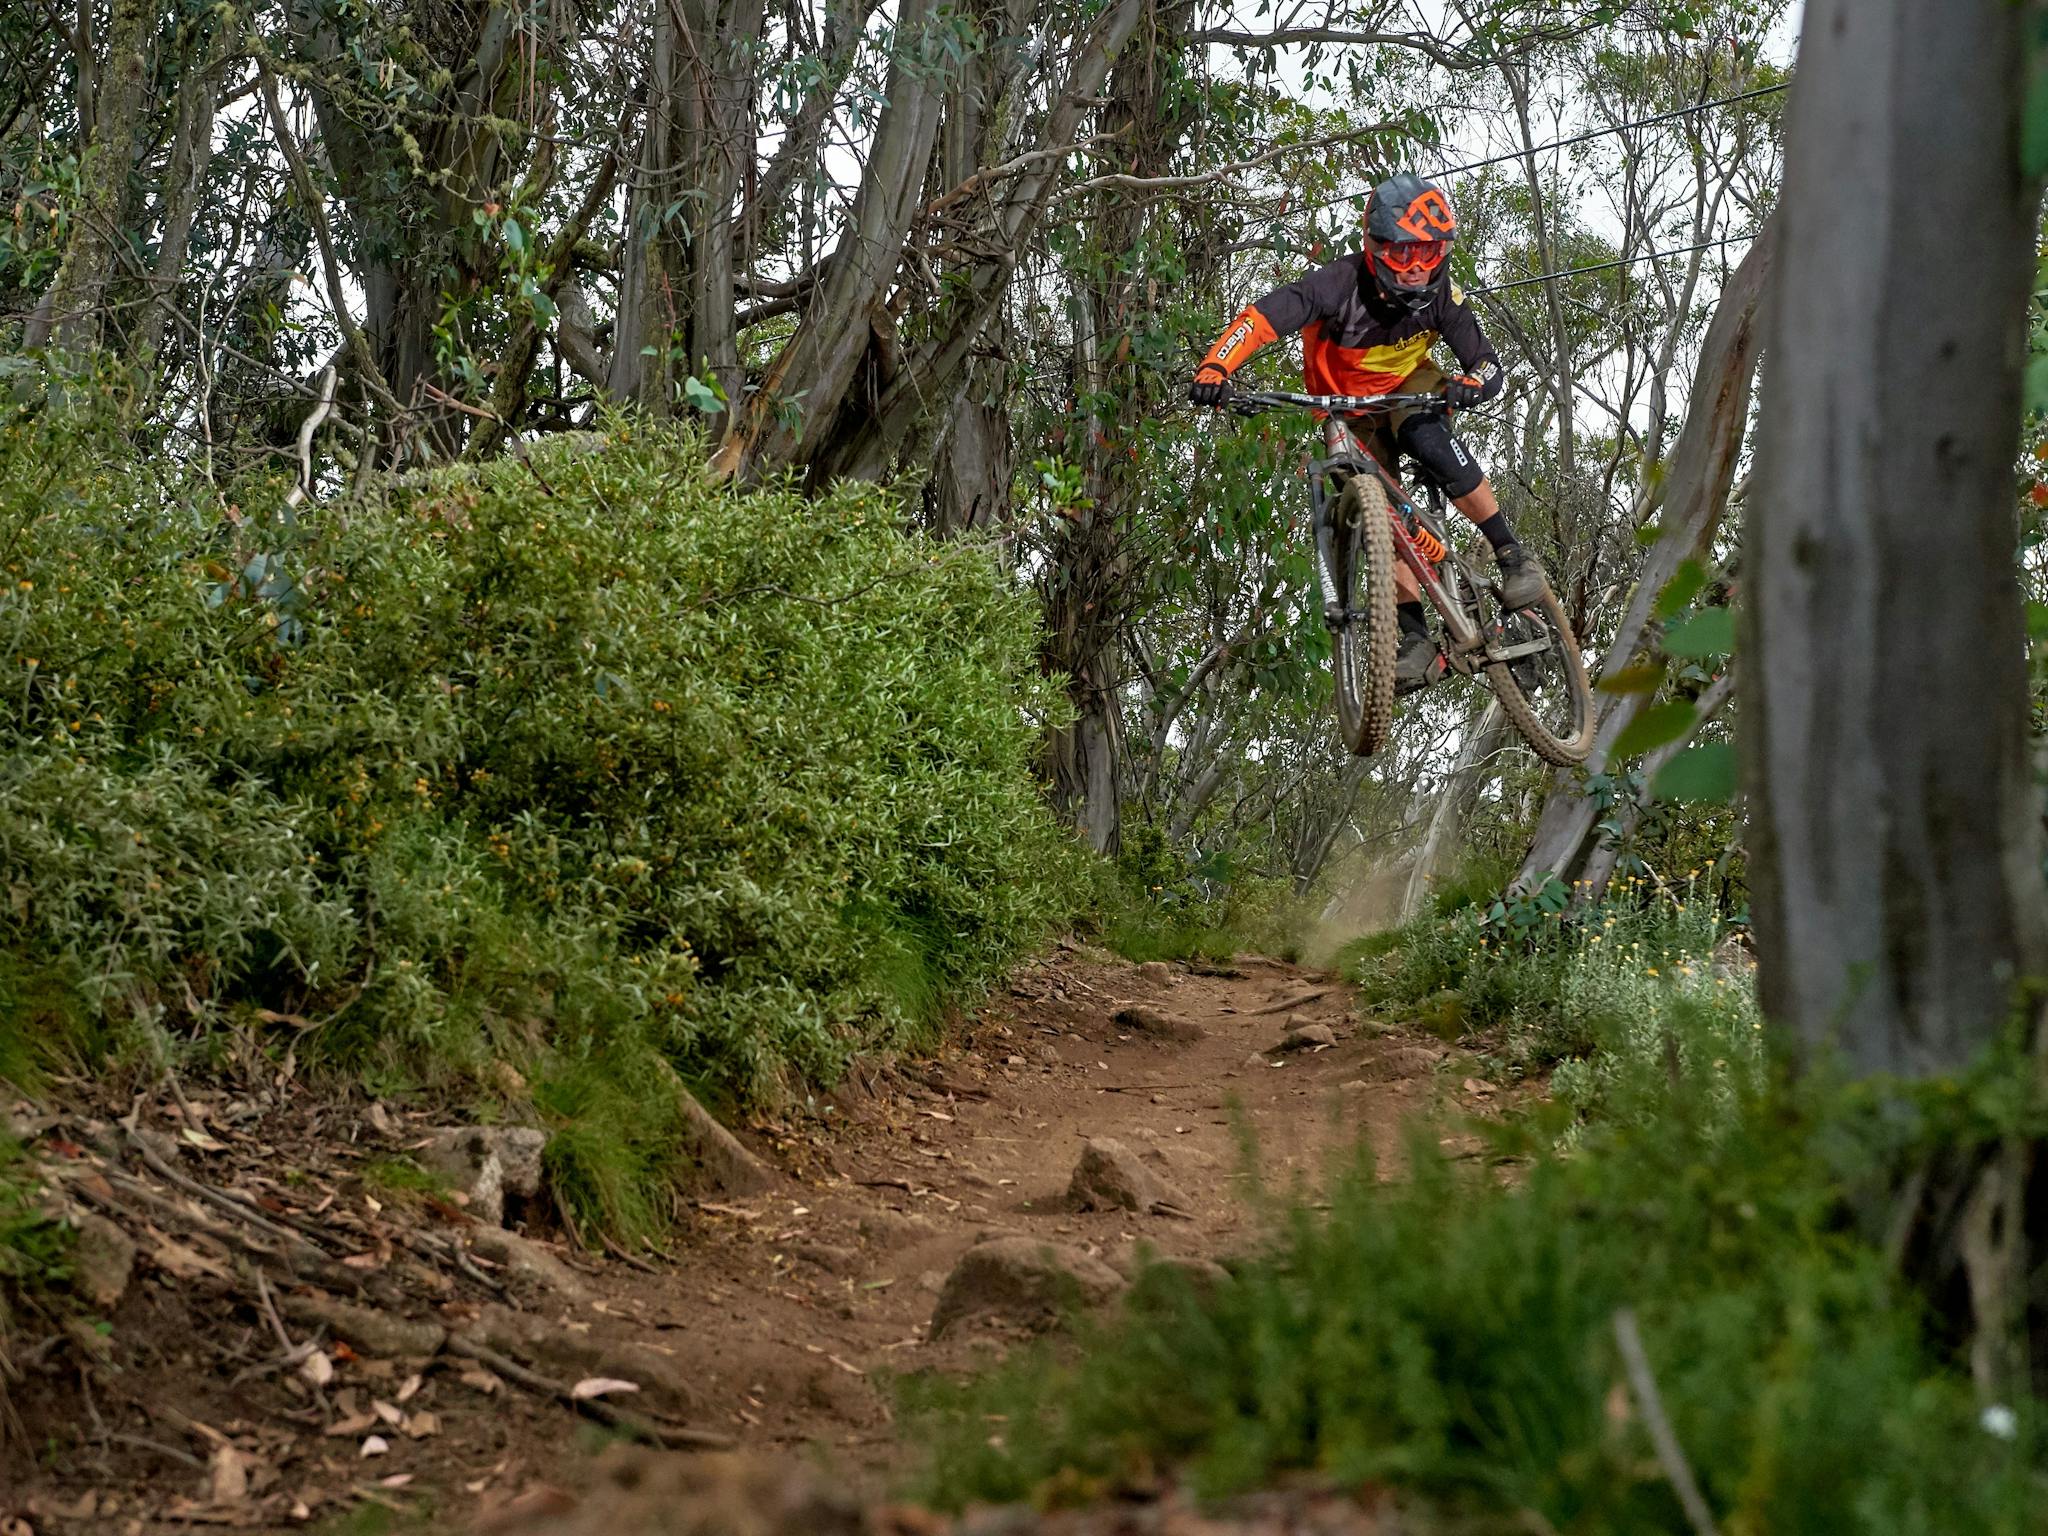 Going full send on Abom DH trail